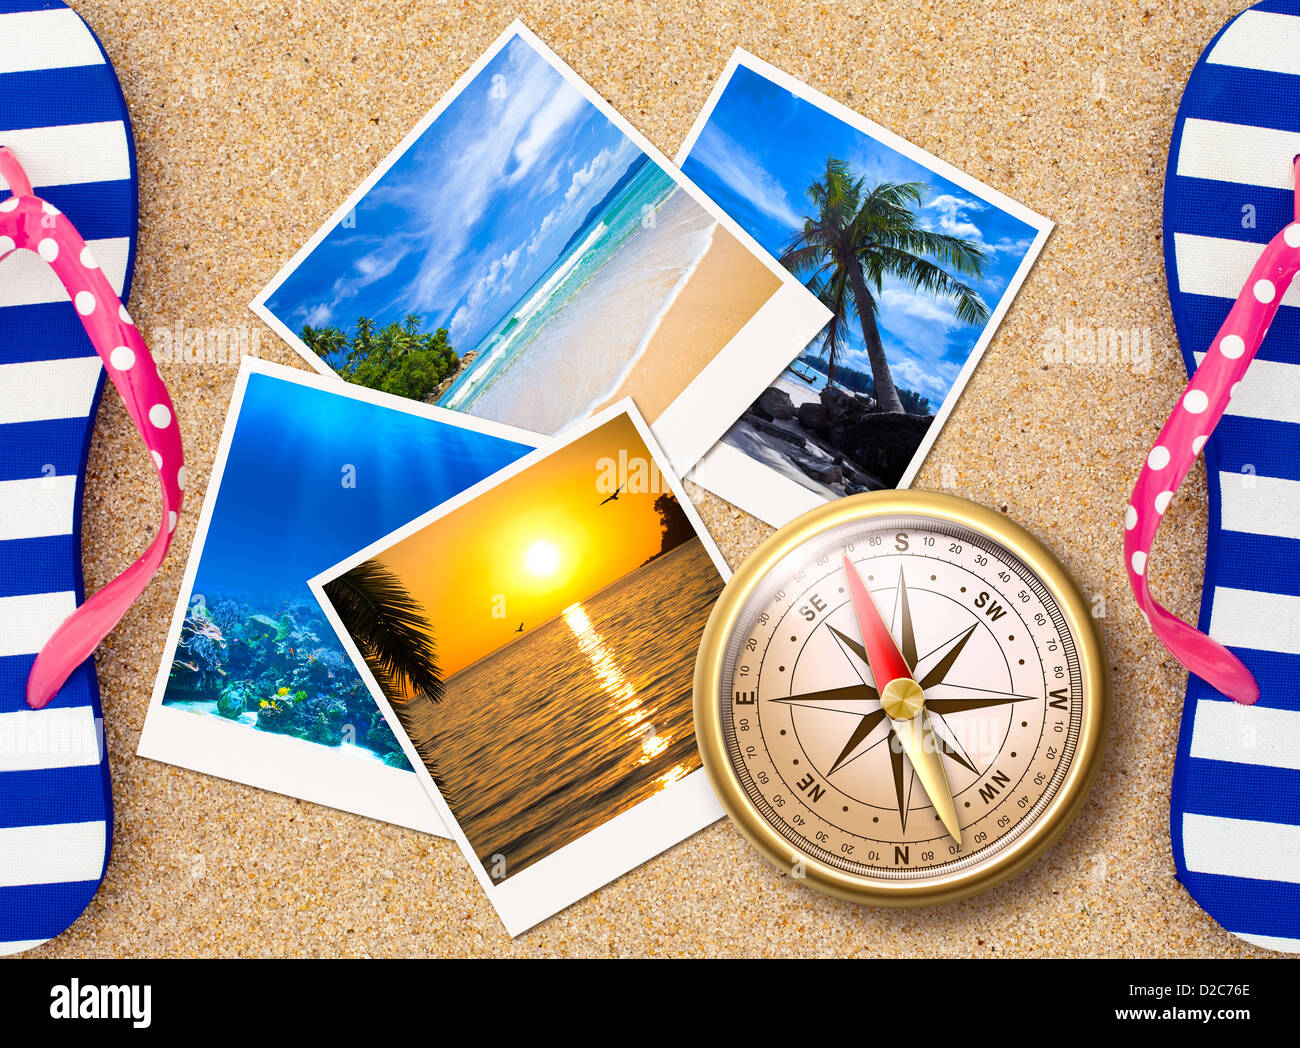 Traveling photos collage with compass on sand beach Stock Photo